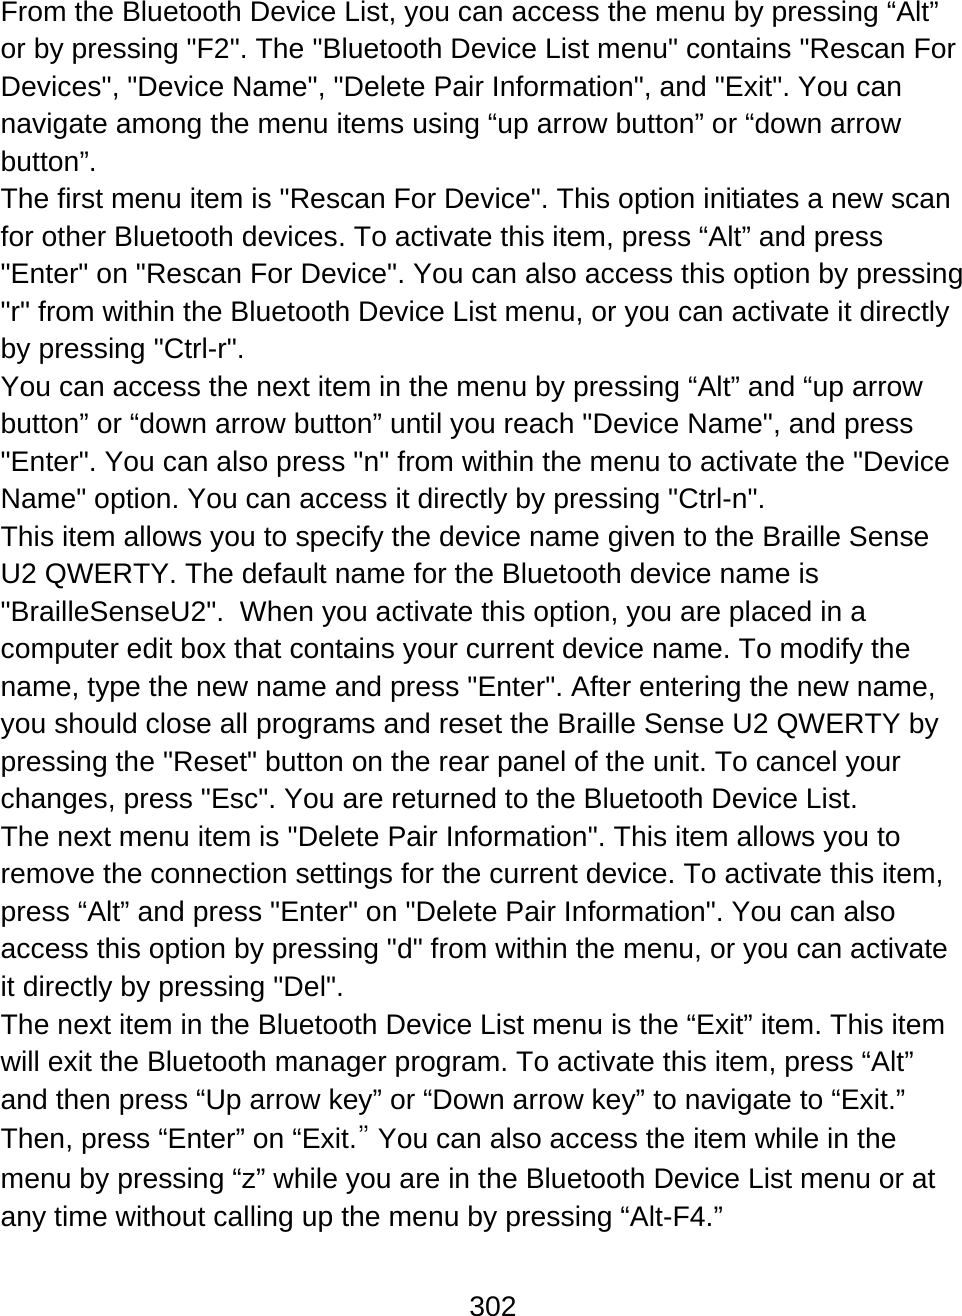 302  From the Bluetooth Device List, you can access the menu by pressing “Alt” or by pressing &quot;F2&quot;. The &quot;Bluetooth Device List menu&quot; contains &quot;Rescan For Devices&quot;, &quot;Device Name&quot;, &quot;Delete Pair Information&quot;, and &quot;Exit&quot;. You can navigate among the menu items using “up arrow button” or “down arrow button”. The first menu item is &quot;Rescan For Device&quot;. This option initiates a new scan for other Bluetooth devices. To activate this item, press “Alt” and press &quot;Enter&quot; on &quot;Rescan For Device&quot;. You can also access this option by pressing &quot;r&quot; from within the Bluetooth Device List menu, or you can activate it directly by pressing &quot;Ctrl-r&quot;. You can access the next item in the menu by pressing “Alt” and “up arrow button” or “down arrow button” until you reach &quot;Device Name&quot;, and press &quot;Enter&quot;. You can also press &quot;n&quot; from within the menu to activate the &quot;Device Name&quot; option. You can access it directly by pressing &quot;Ctrl-n&quot;.  This item allows you to specify the device name given to the Braille Sense U2 QWERTY. The default name for the Bluetooth device name is &quot;BrailleSenseU2&quot;.  When you activate this option, you are placed in a computer edit box that contains your current device name. To modify the name, type the new name and press &quot;Enter&quot;. After entering the new name, you should close all programs and reset the Braille Sense U2 QWERTY by pressing the &quot;Reset&quot; button on the rear panel of the unit. To cancel your changes, press &quot;Esc&quot;. You are returned to the Bluetooth Device List. The next menu item is &quot;Delete Pair Information&quot;. This item allows you to remove the connection settings for the current device. To activate this item, press “Alt” and press &quot;Enter&quot; on &quot;Delete Pair Information&quot;. You can also access this option by pressing &quot;d&quot; from within the menu, or you can activate it directly by pressing &quot;Del&quot;. The next item in the Bluetooth Device List menu is the “Exit” item. This item will exit the Bluetooth manager program. To activate this item, press “Alt” and then press “Up arrow key” or “Down arrow key” to navigate to “Exit.” Then, press “Enter” on “Exit.” You can also access the item while in the menu by pressing “z” while you are in the Bluetooth Device List menu or at any time without calling up the menu by pressing “Alt-F4.”  